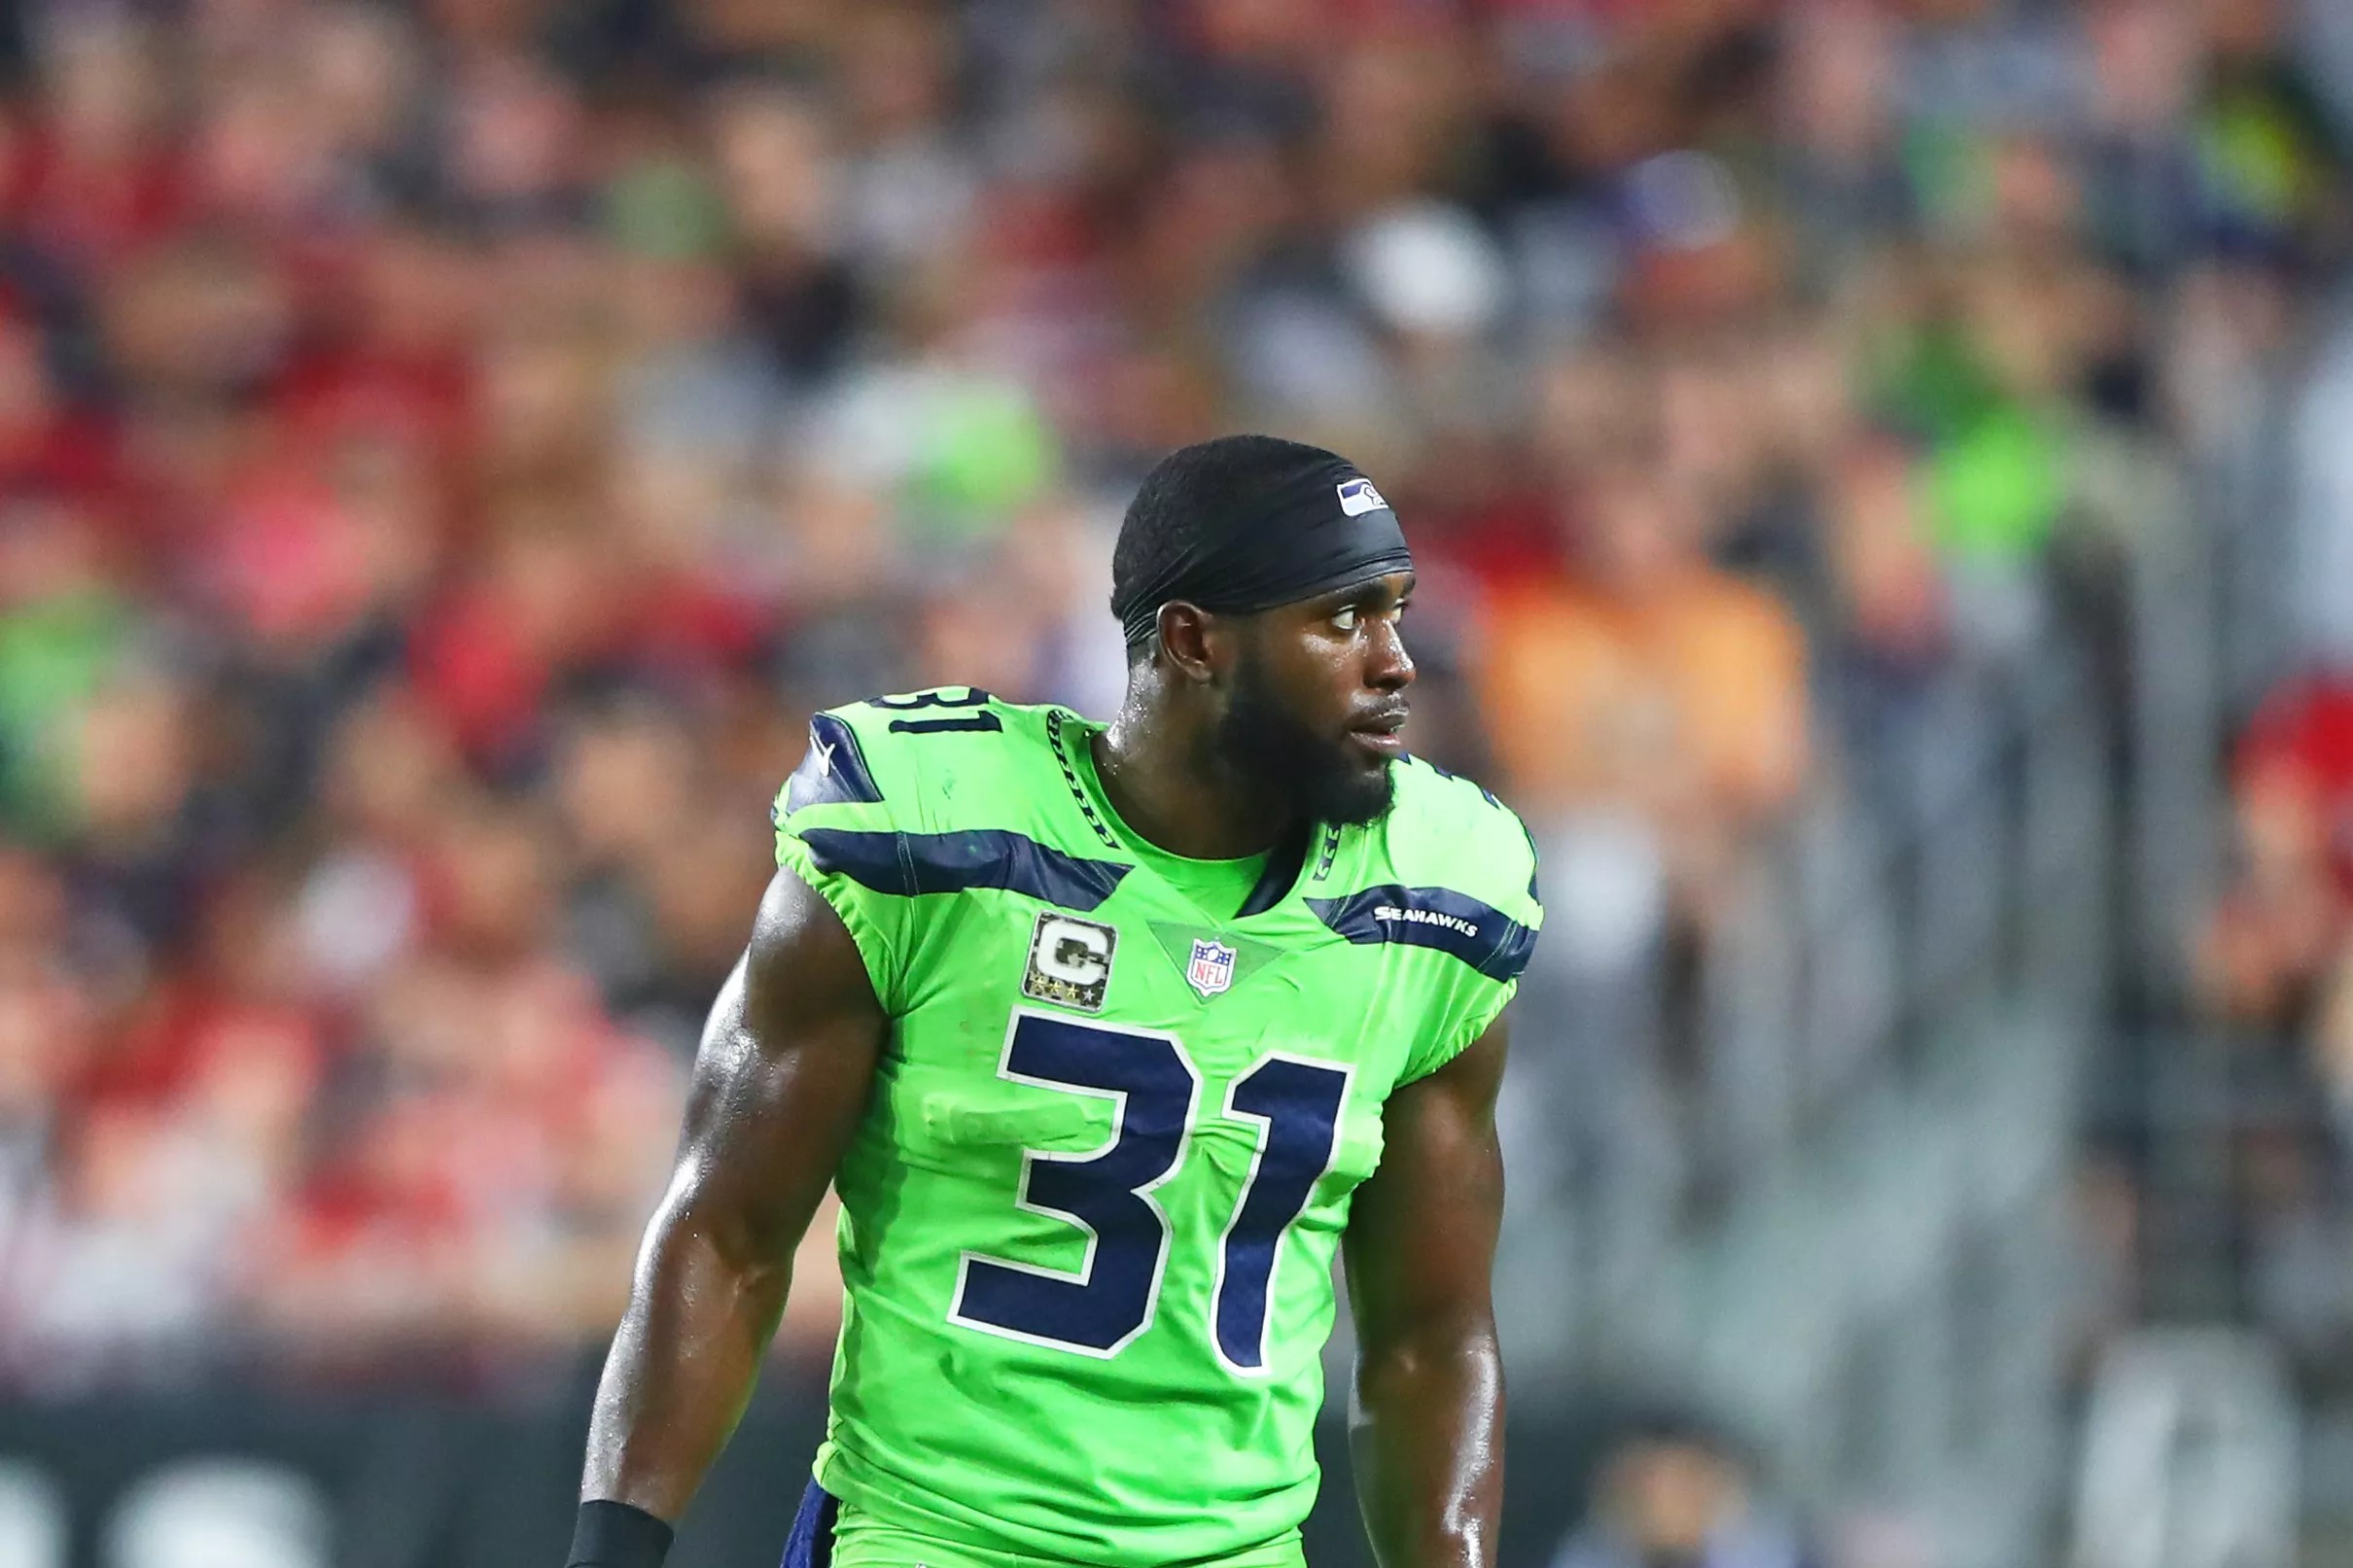 Kam Chancellor doesn’t sound like a player ready to retire